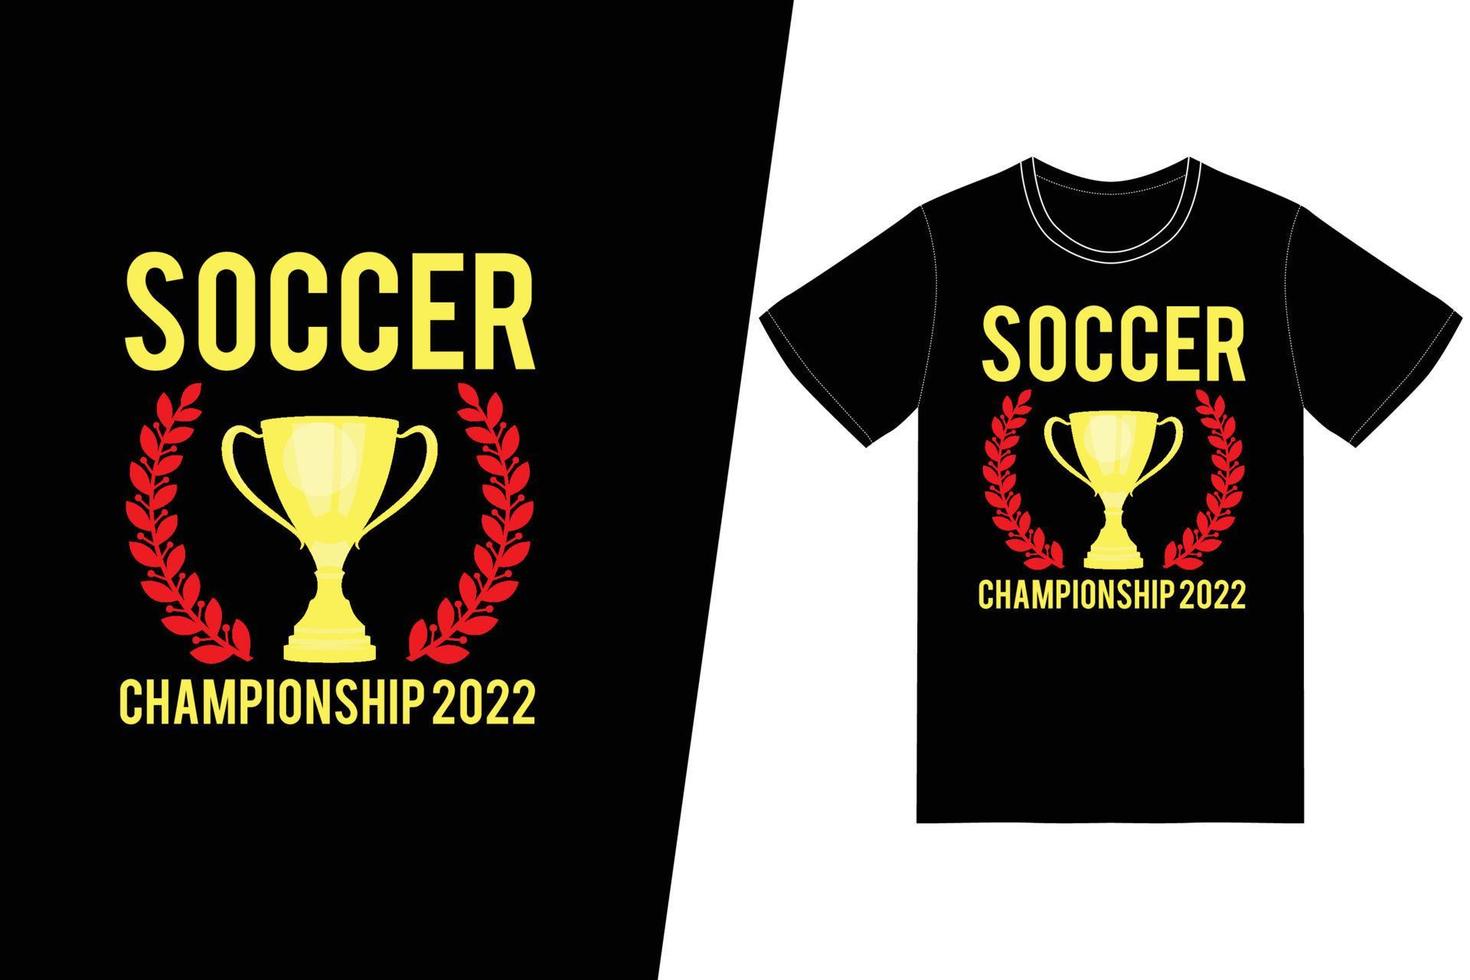 Soccer championship 2022 Soccer design. Soccer t-shirt design vector. For t-shirt print and other uses. vector